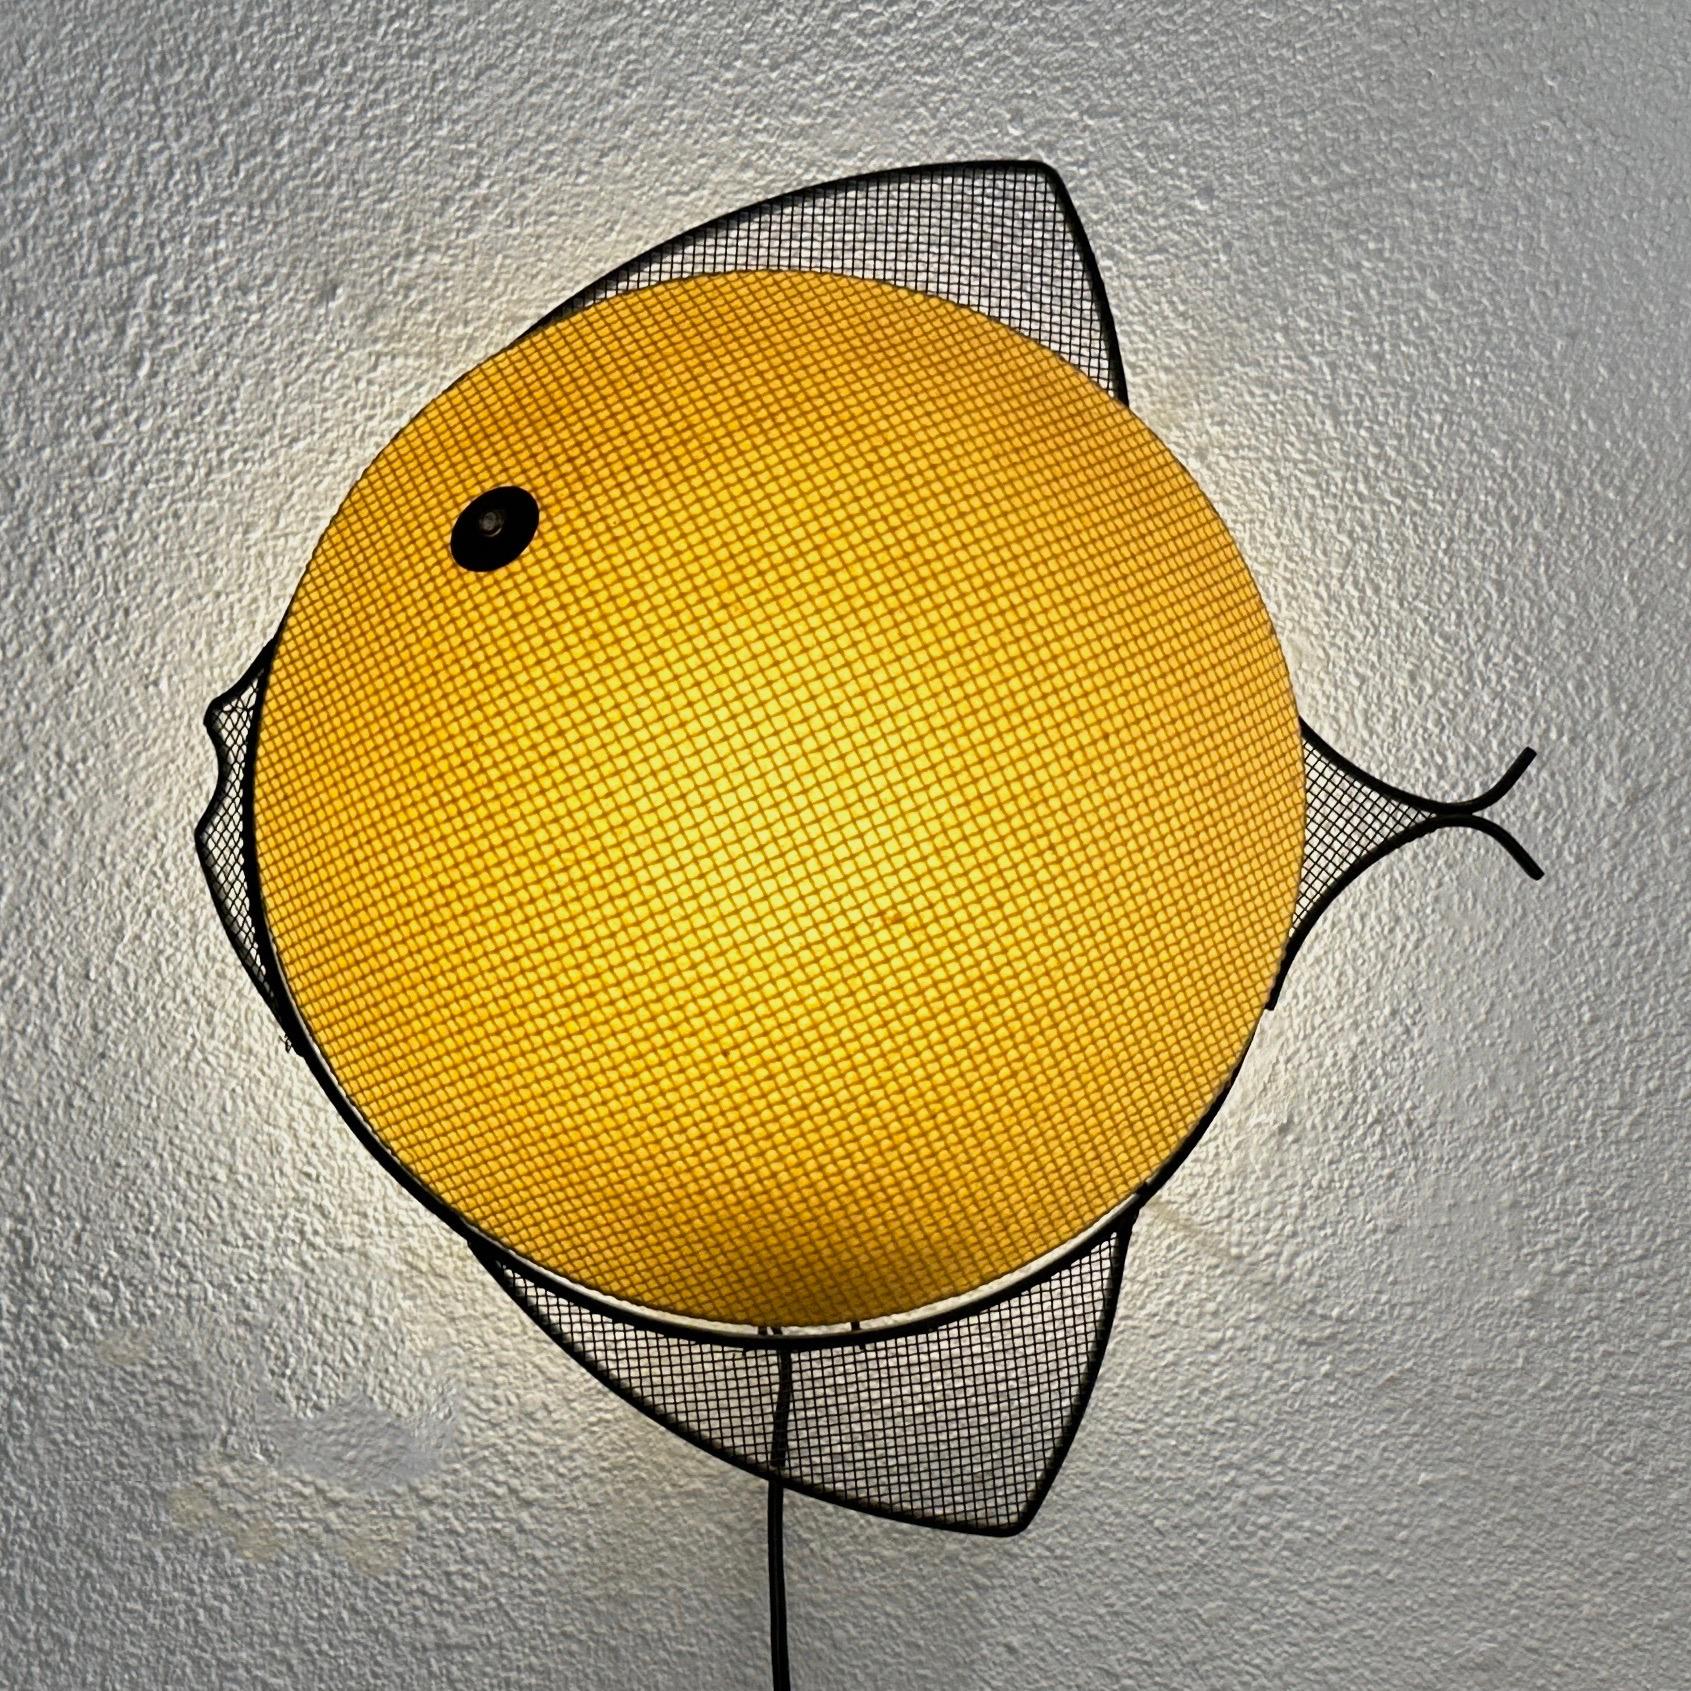 Mid Century Modern Weinberg Mategot Style Metal Fish Wall Lamp with a composite shade. The composite material seems to be a pressed paper of some sort similar to fiberglass but quite sturdy as it has lasted many years. I would suggest using a lower